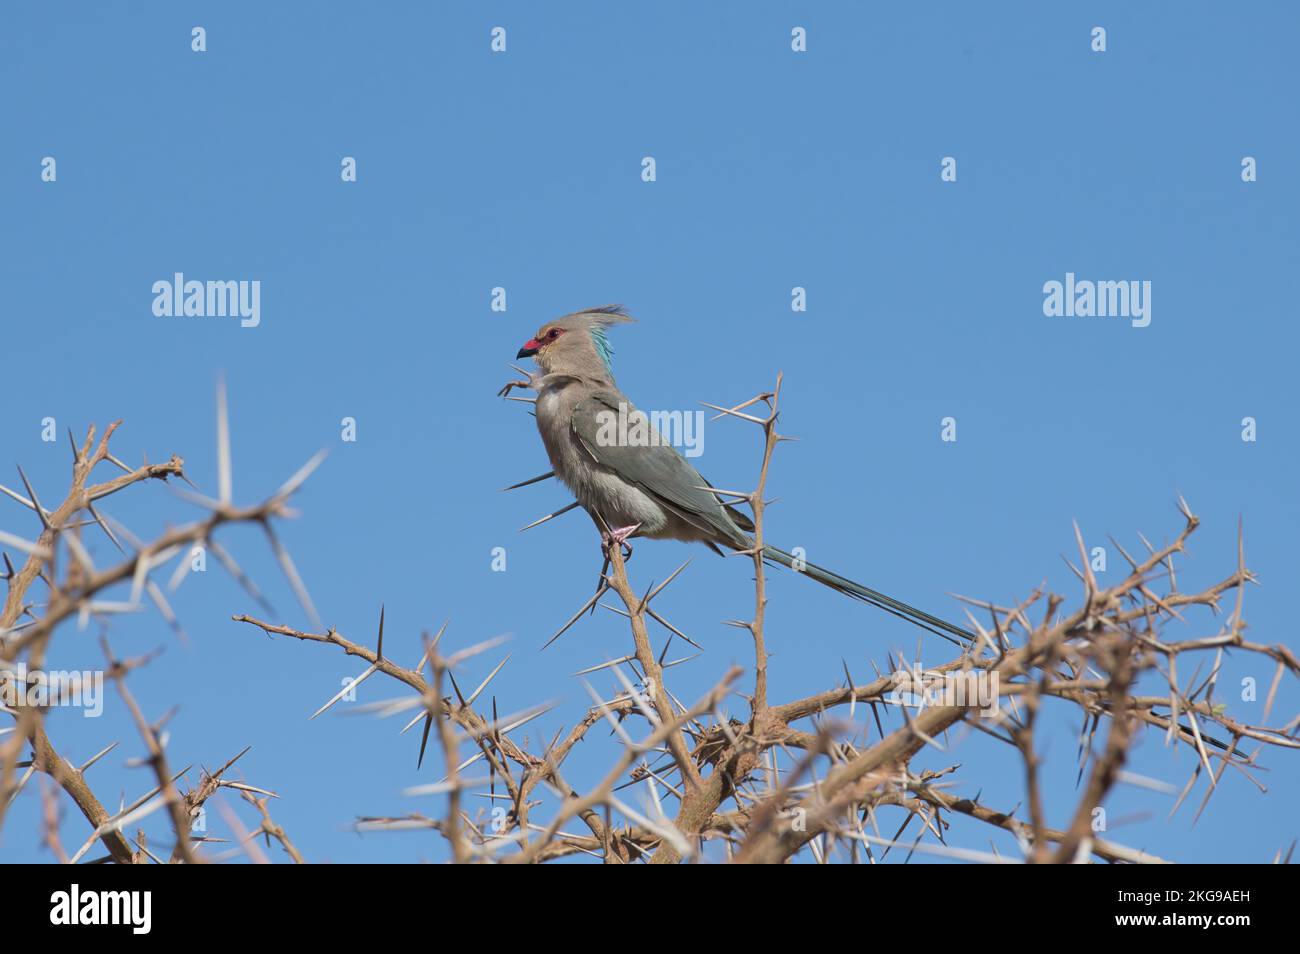 blue-naped mousebird (Urocolius macourus). The pale blue nape patch is visible in the photo. Stock Photo